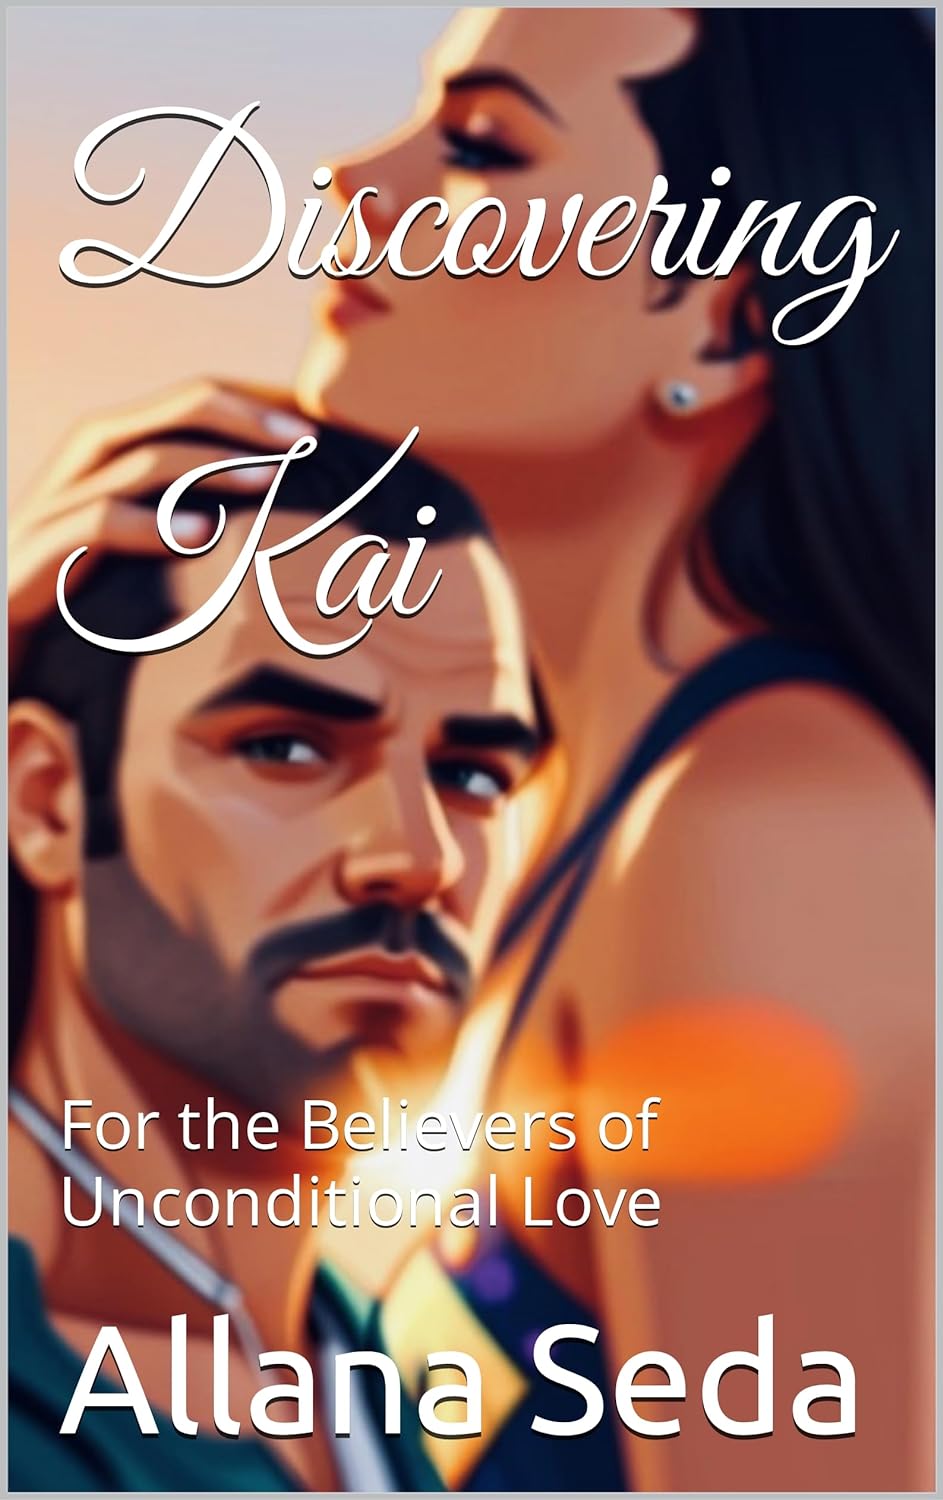 Download Sex Nag Faras - Discovering Kai : For the Believers of Unconditional Love by Allana Seda